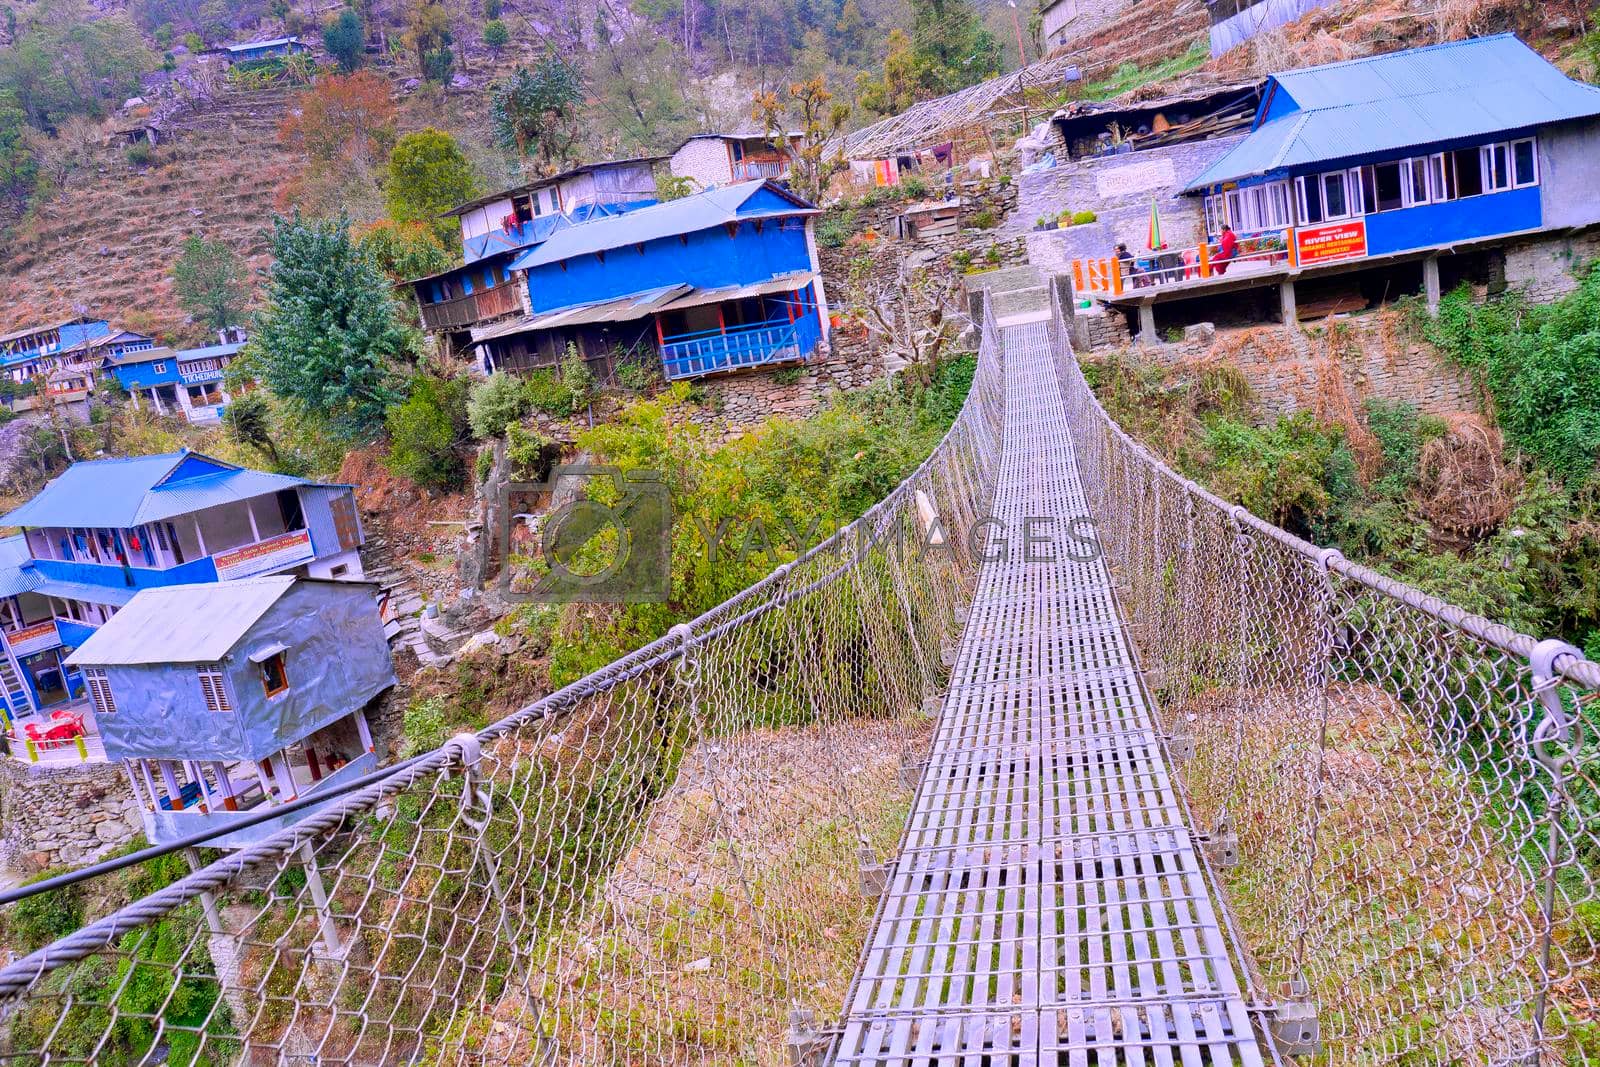 Royalty free image of Suspension Footbridge, Annapurna Conservation Area, Himalaya, Nepal by alcaproac